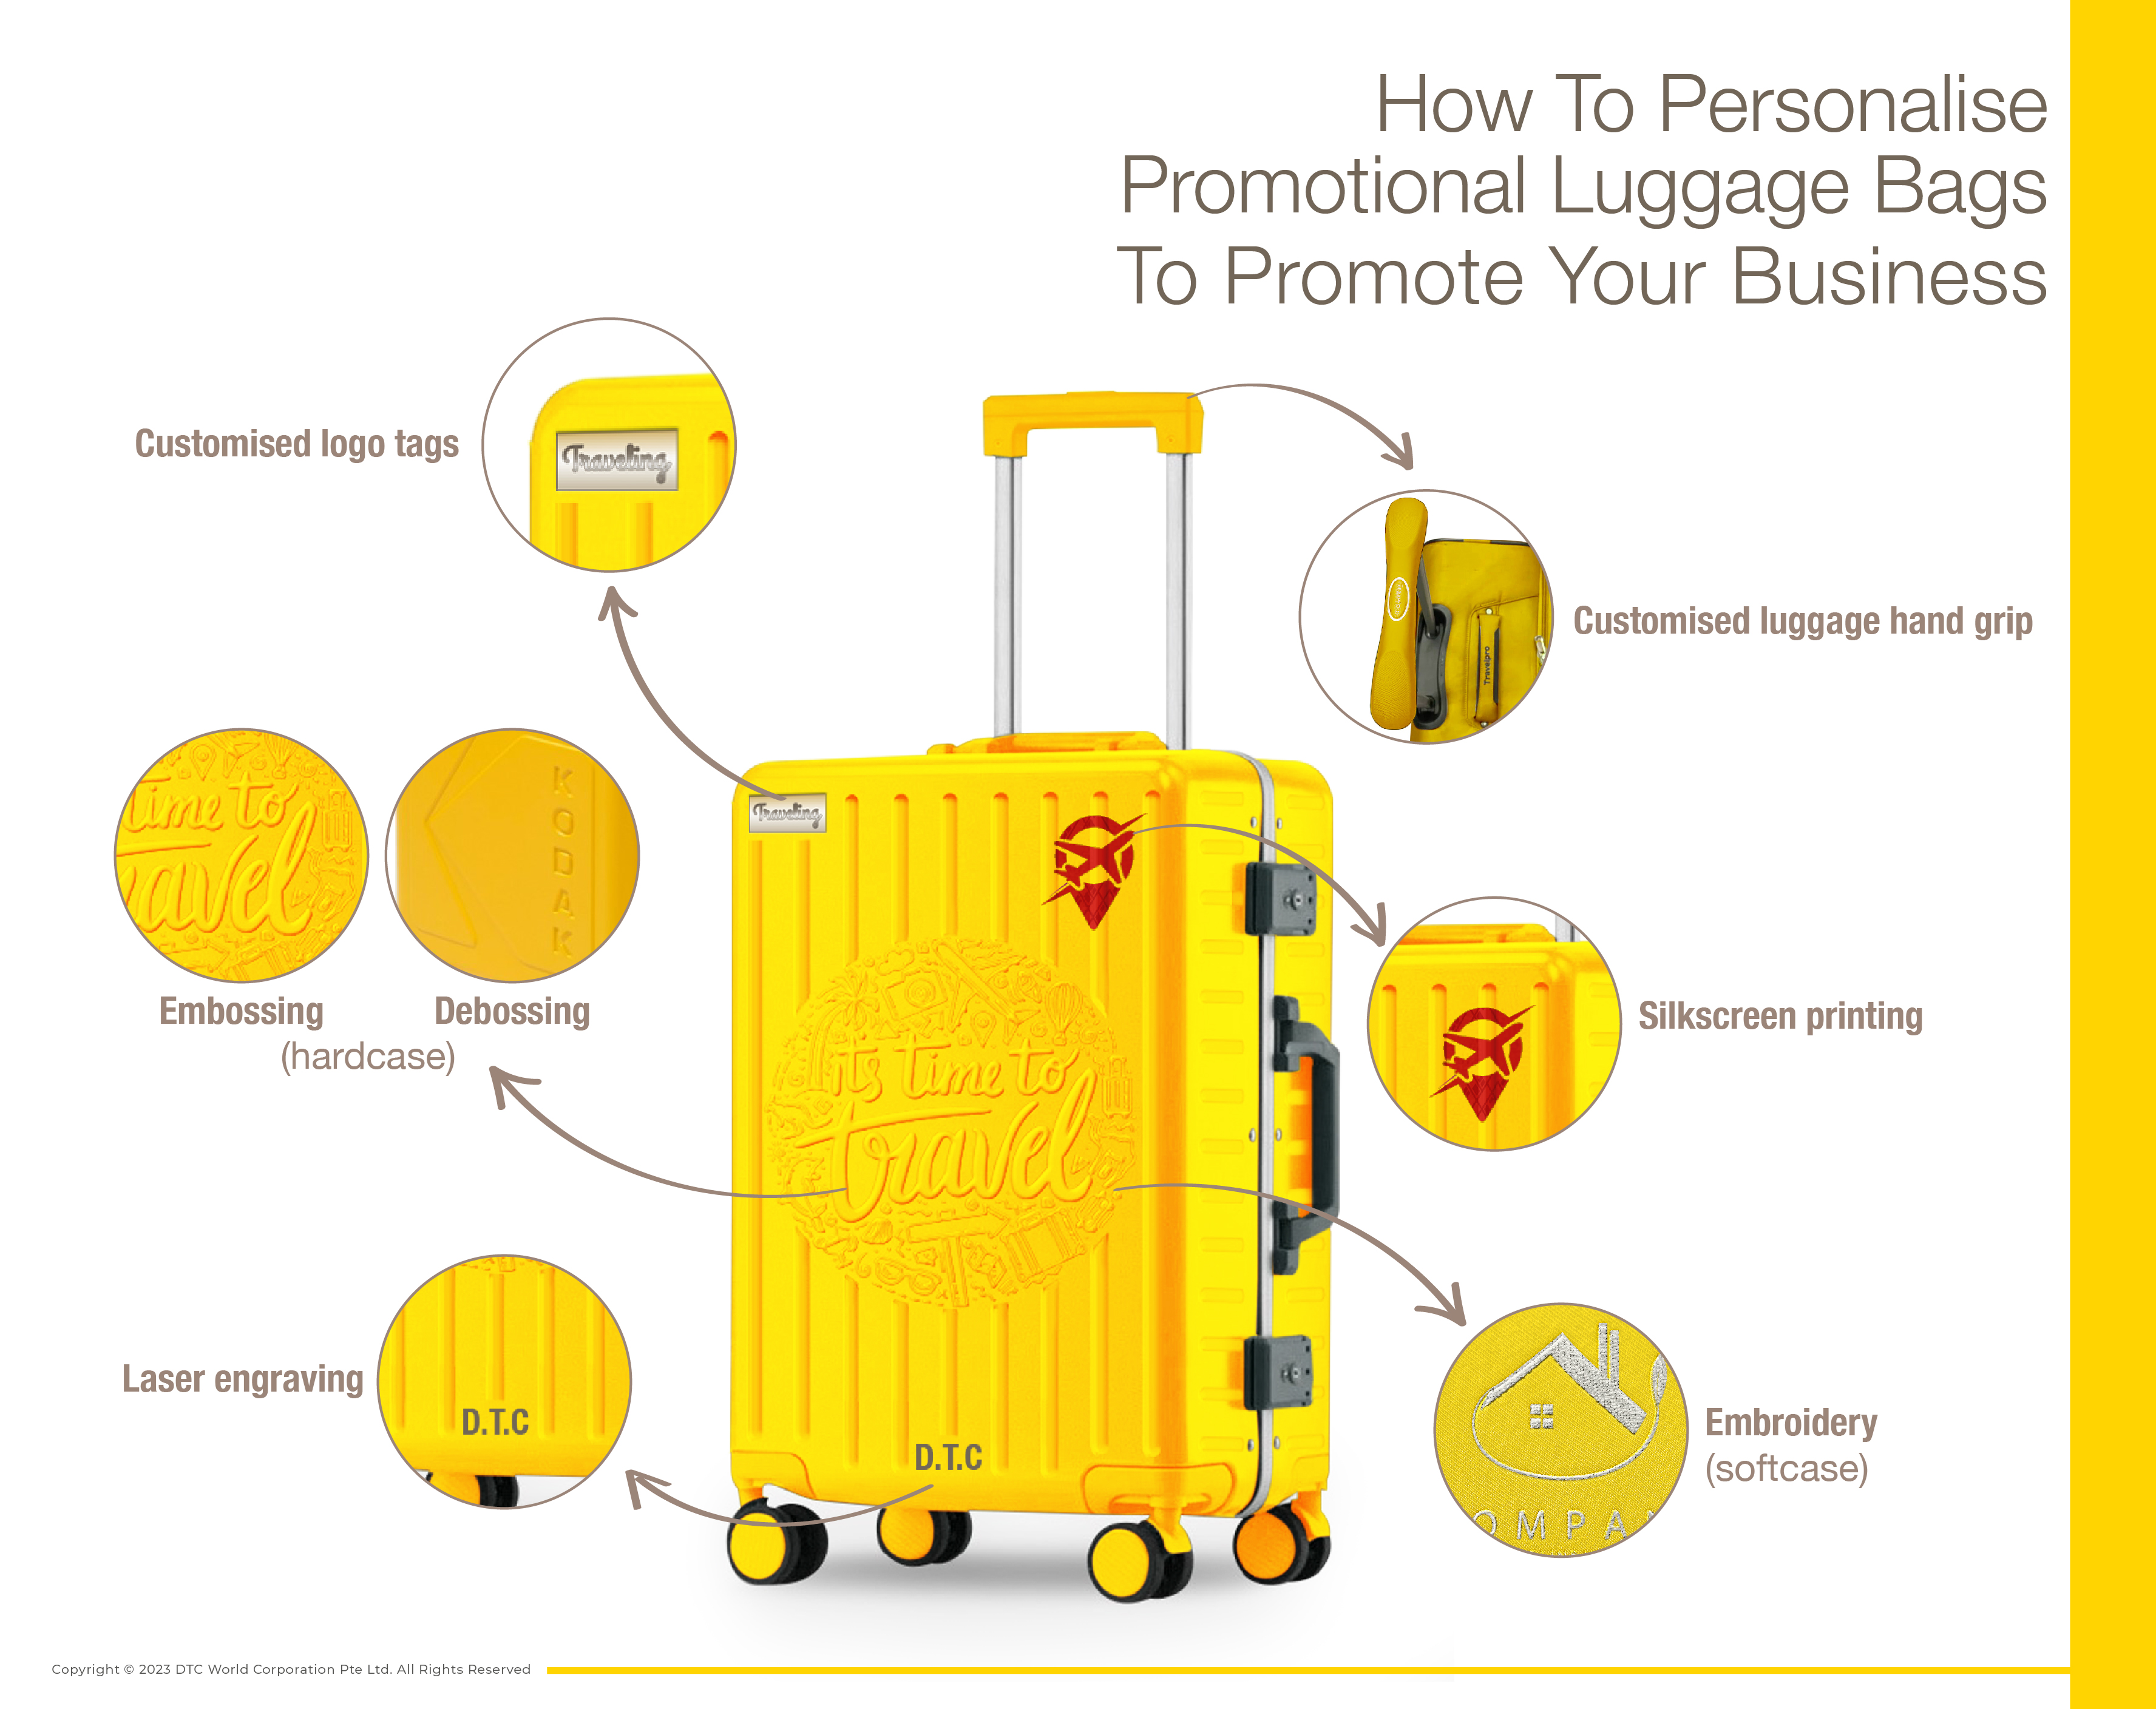 DTC World is able to cater to the different customisation methods to add a personalised touch to your promotional luggage bags